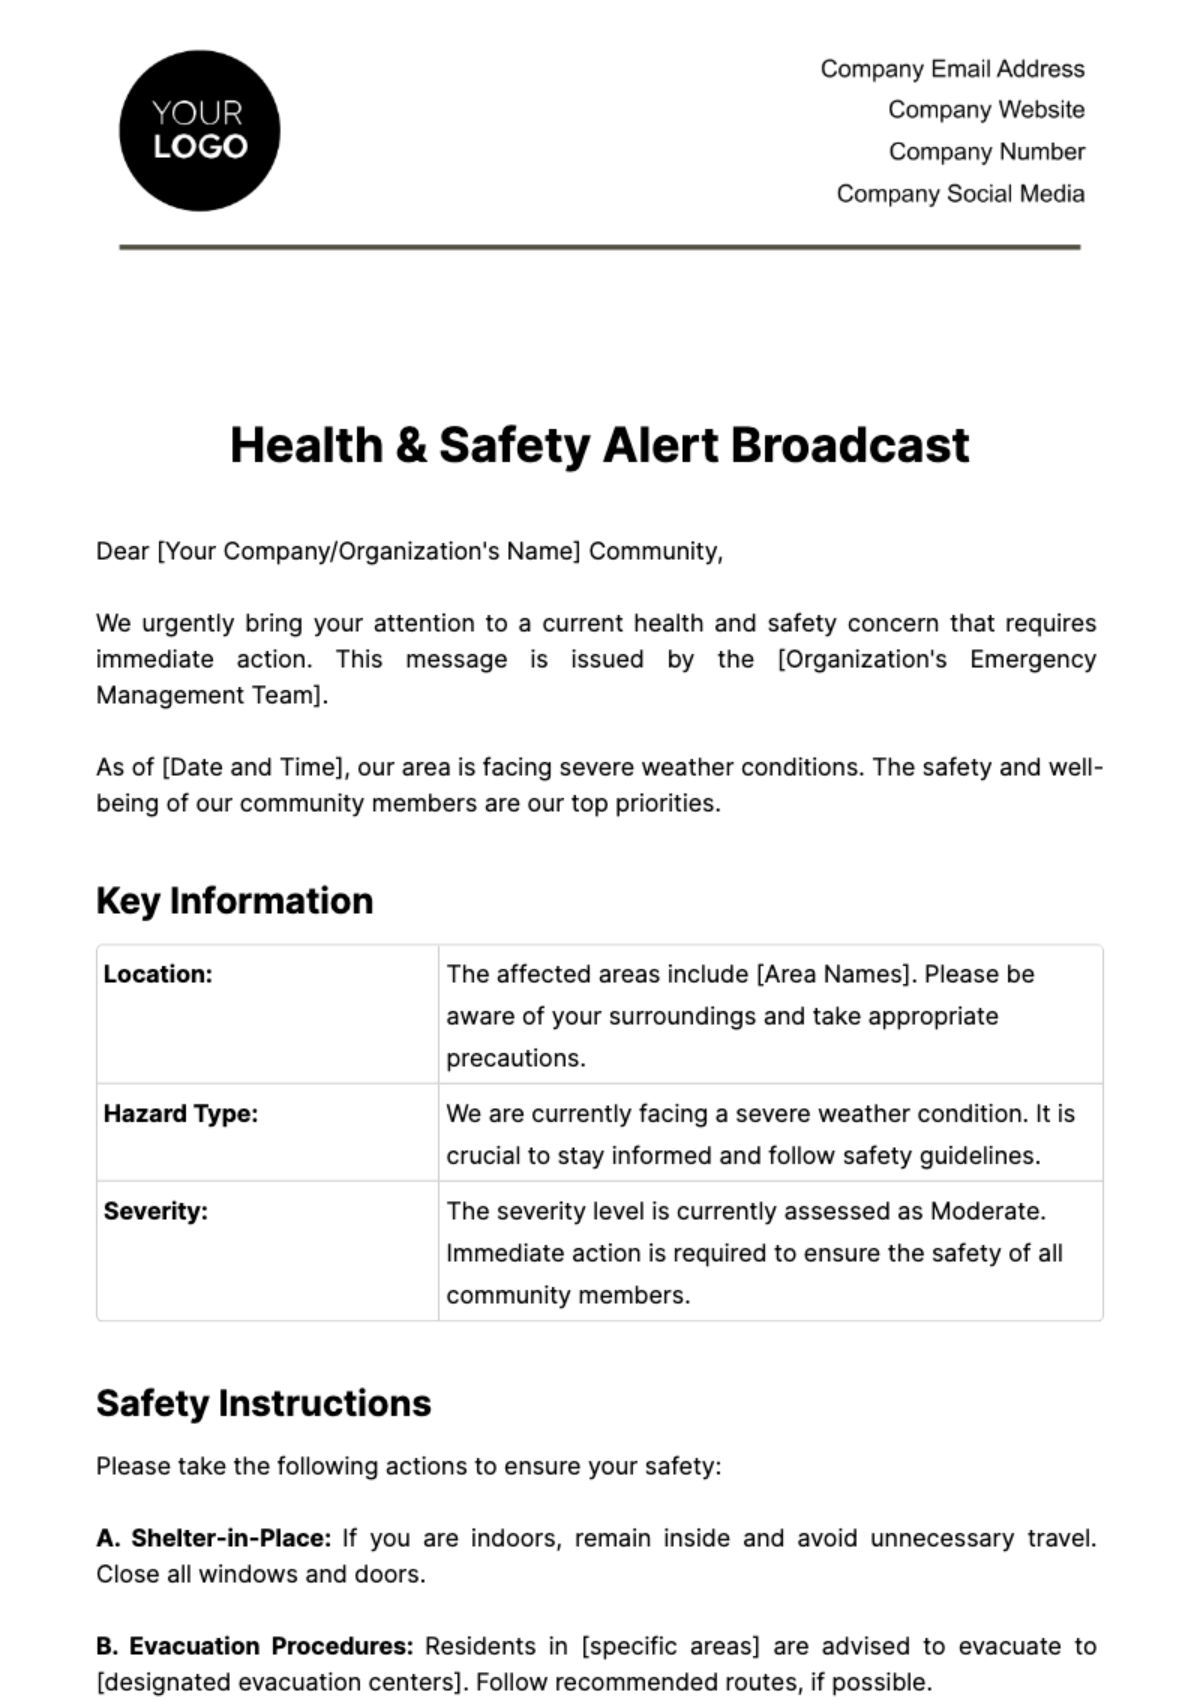 Free Health & Safety Alert Broadcast Template